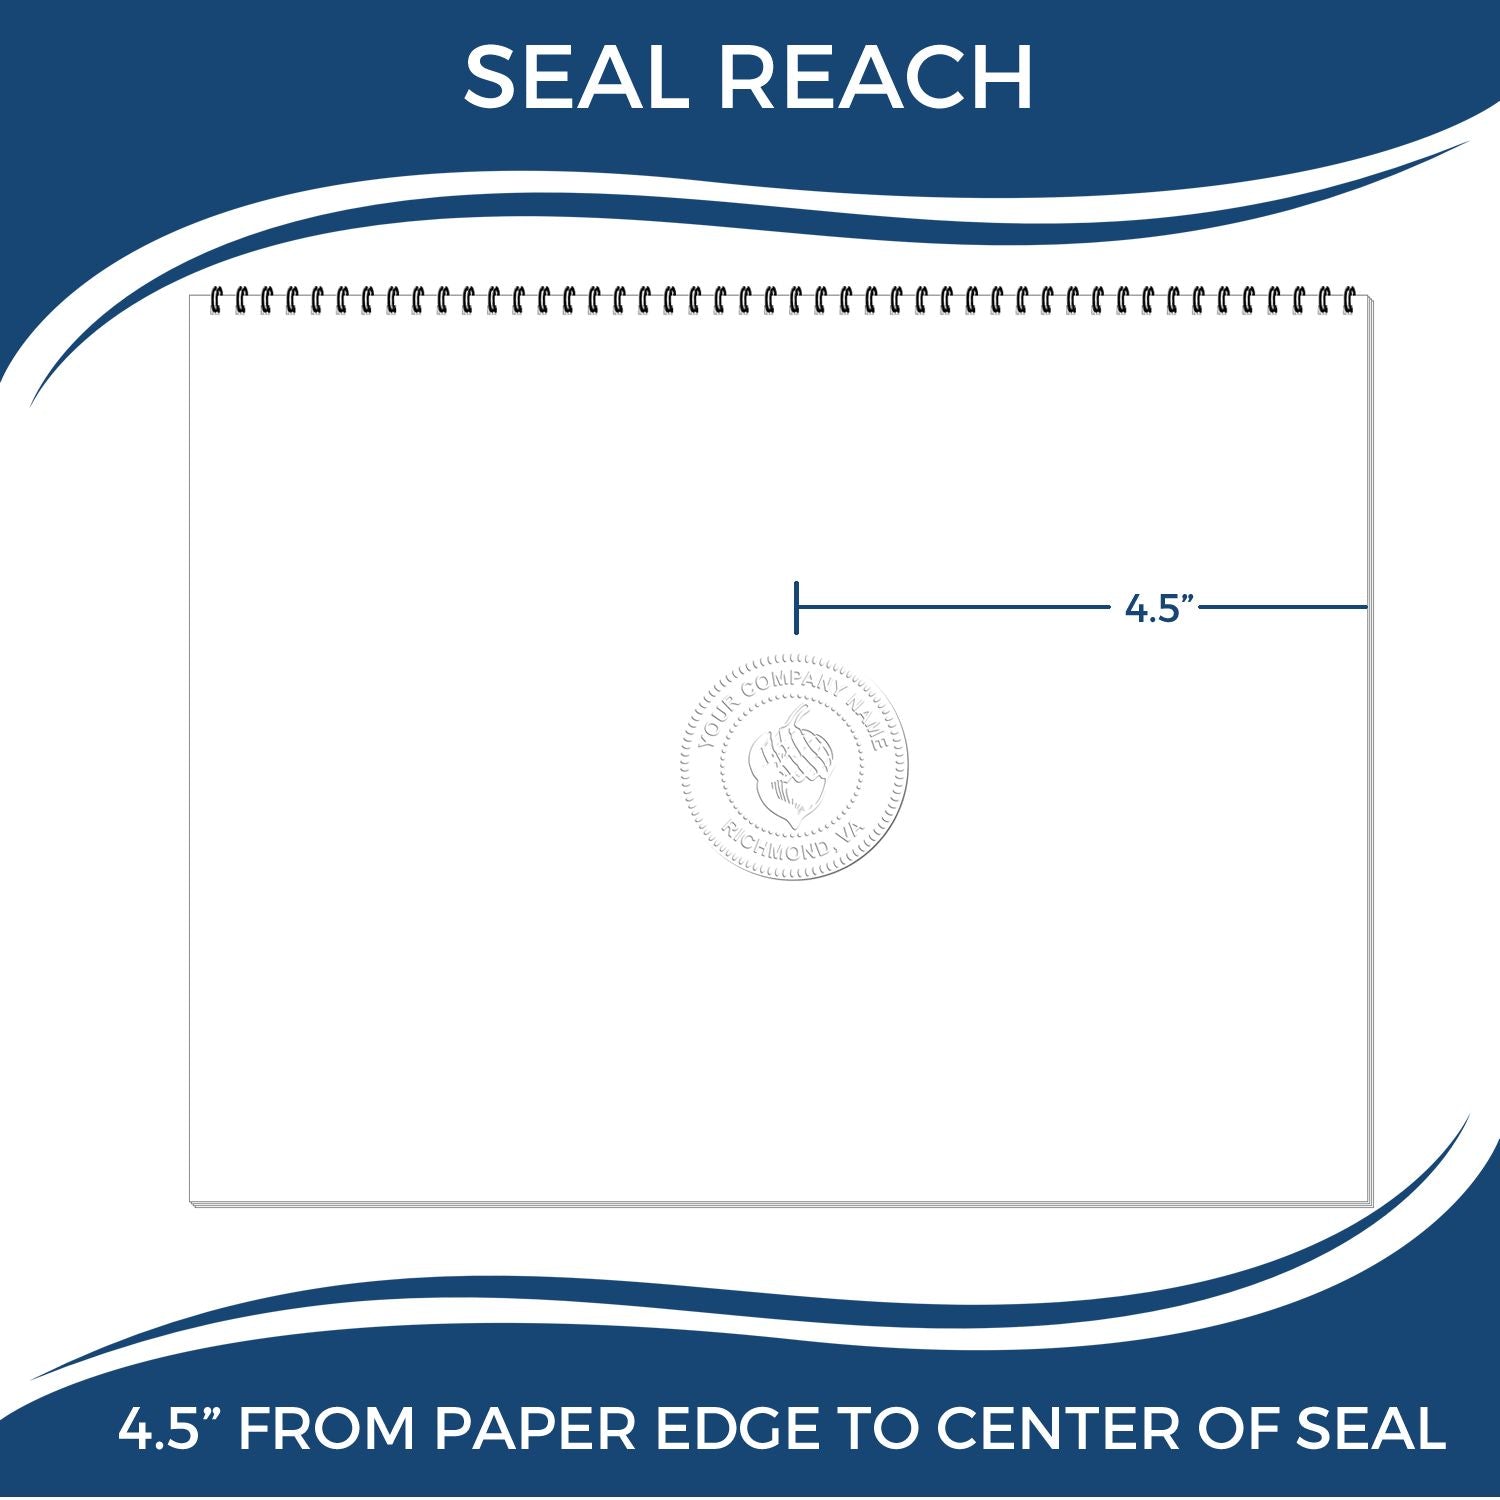 An infographic showing the seal reach which is represented by a ruler and a miniature seal image of the Extended Long Reach Maine Surveyor Embosser